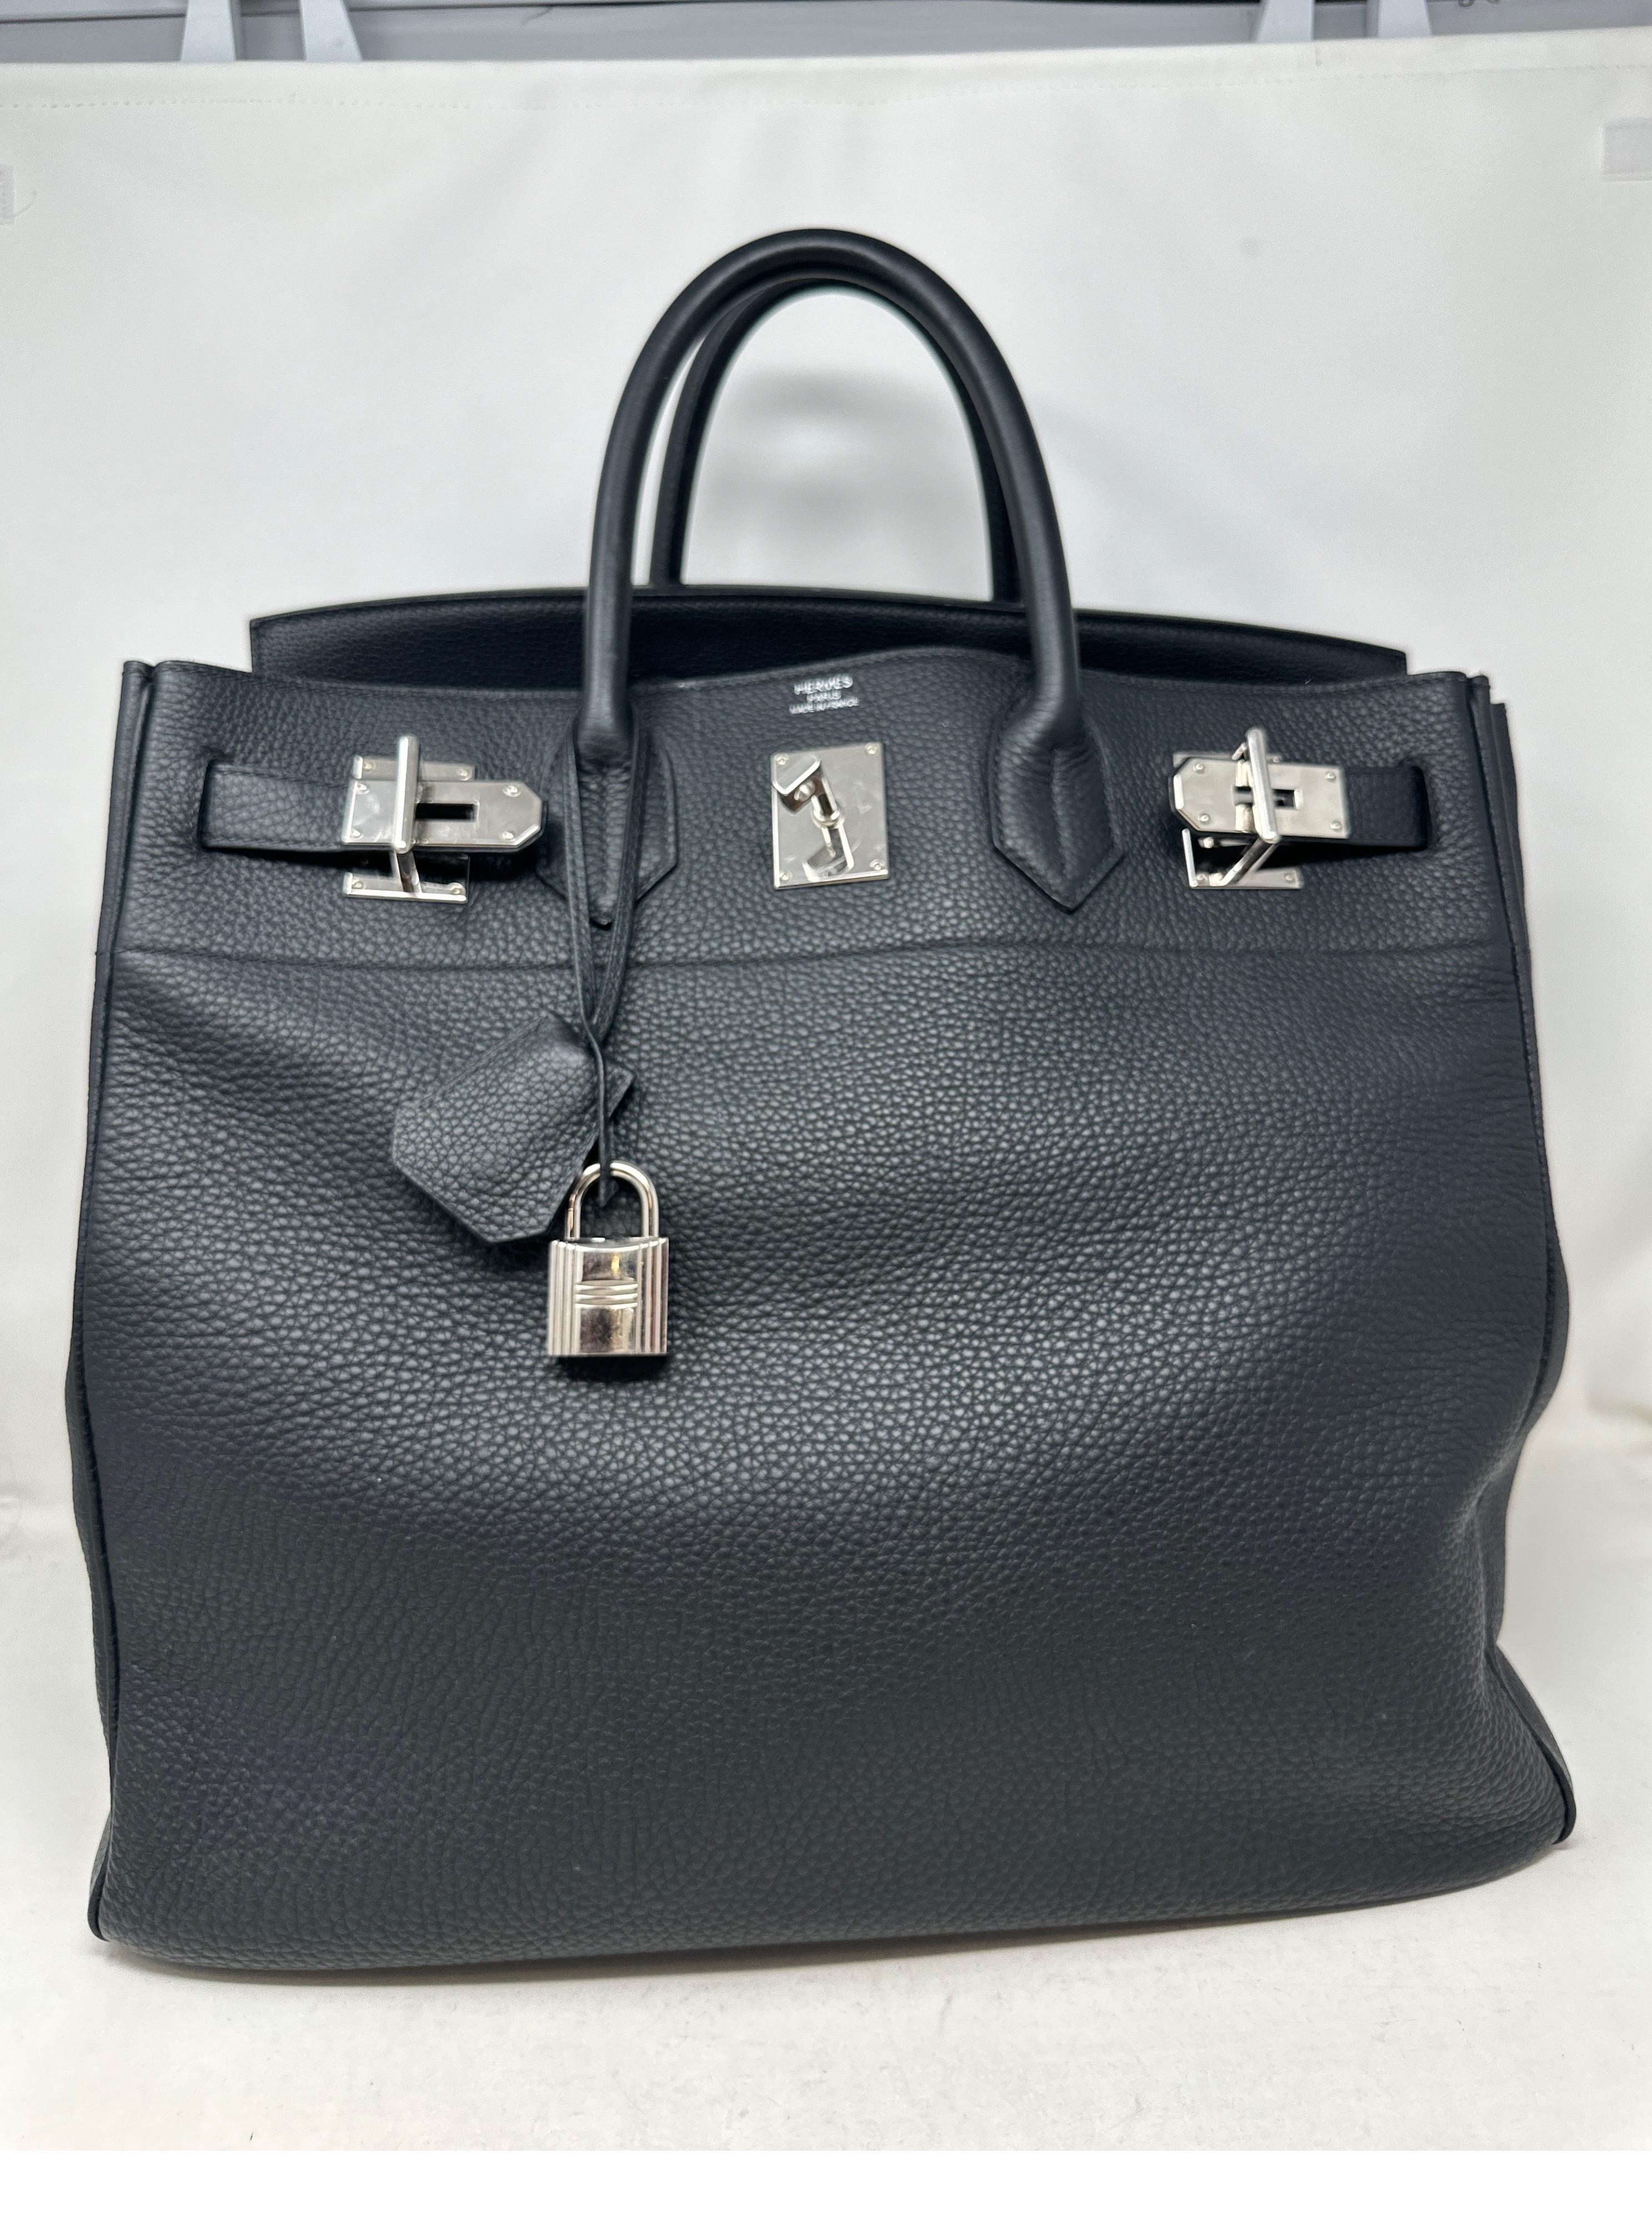 Hermes Black HAC 40 Bag. New HAC luggage from Hermes. Big carry on size bag. Togo leather. Excellent condition. Interior clean. Palladium silver hardware. Includes clochette, lock, and keys. Guaranteed authentic. 